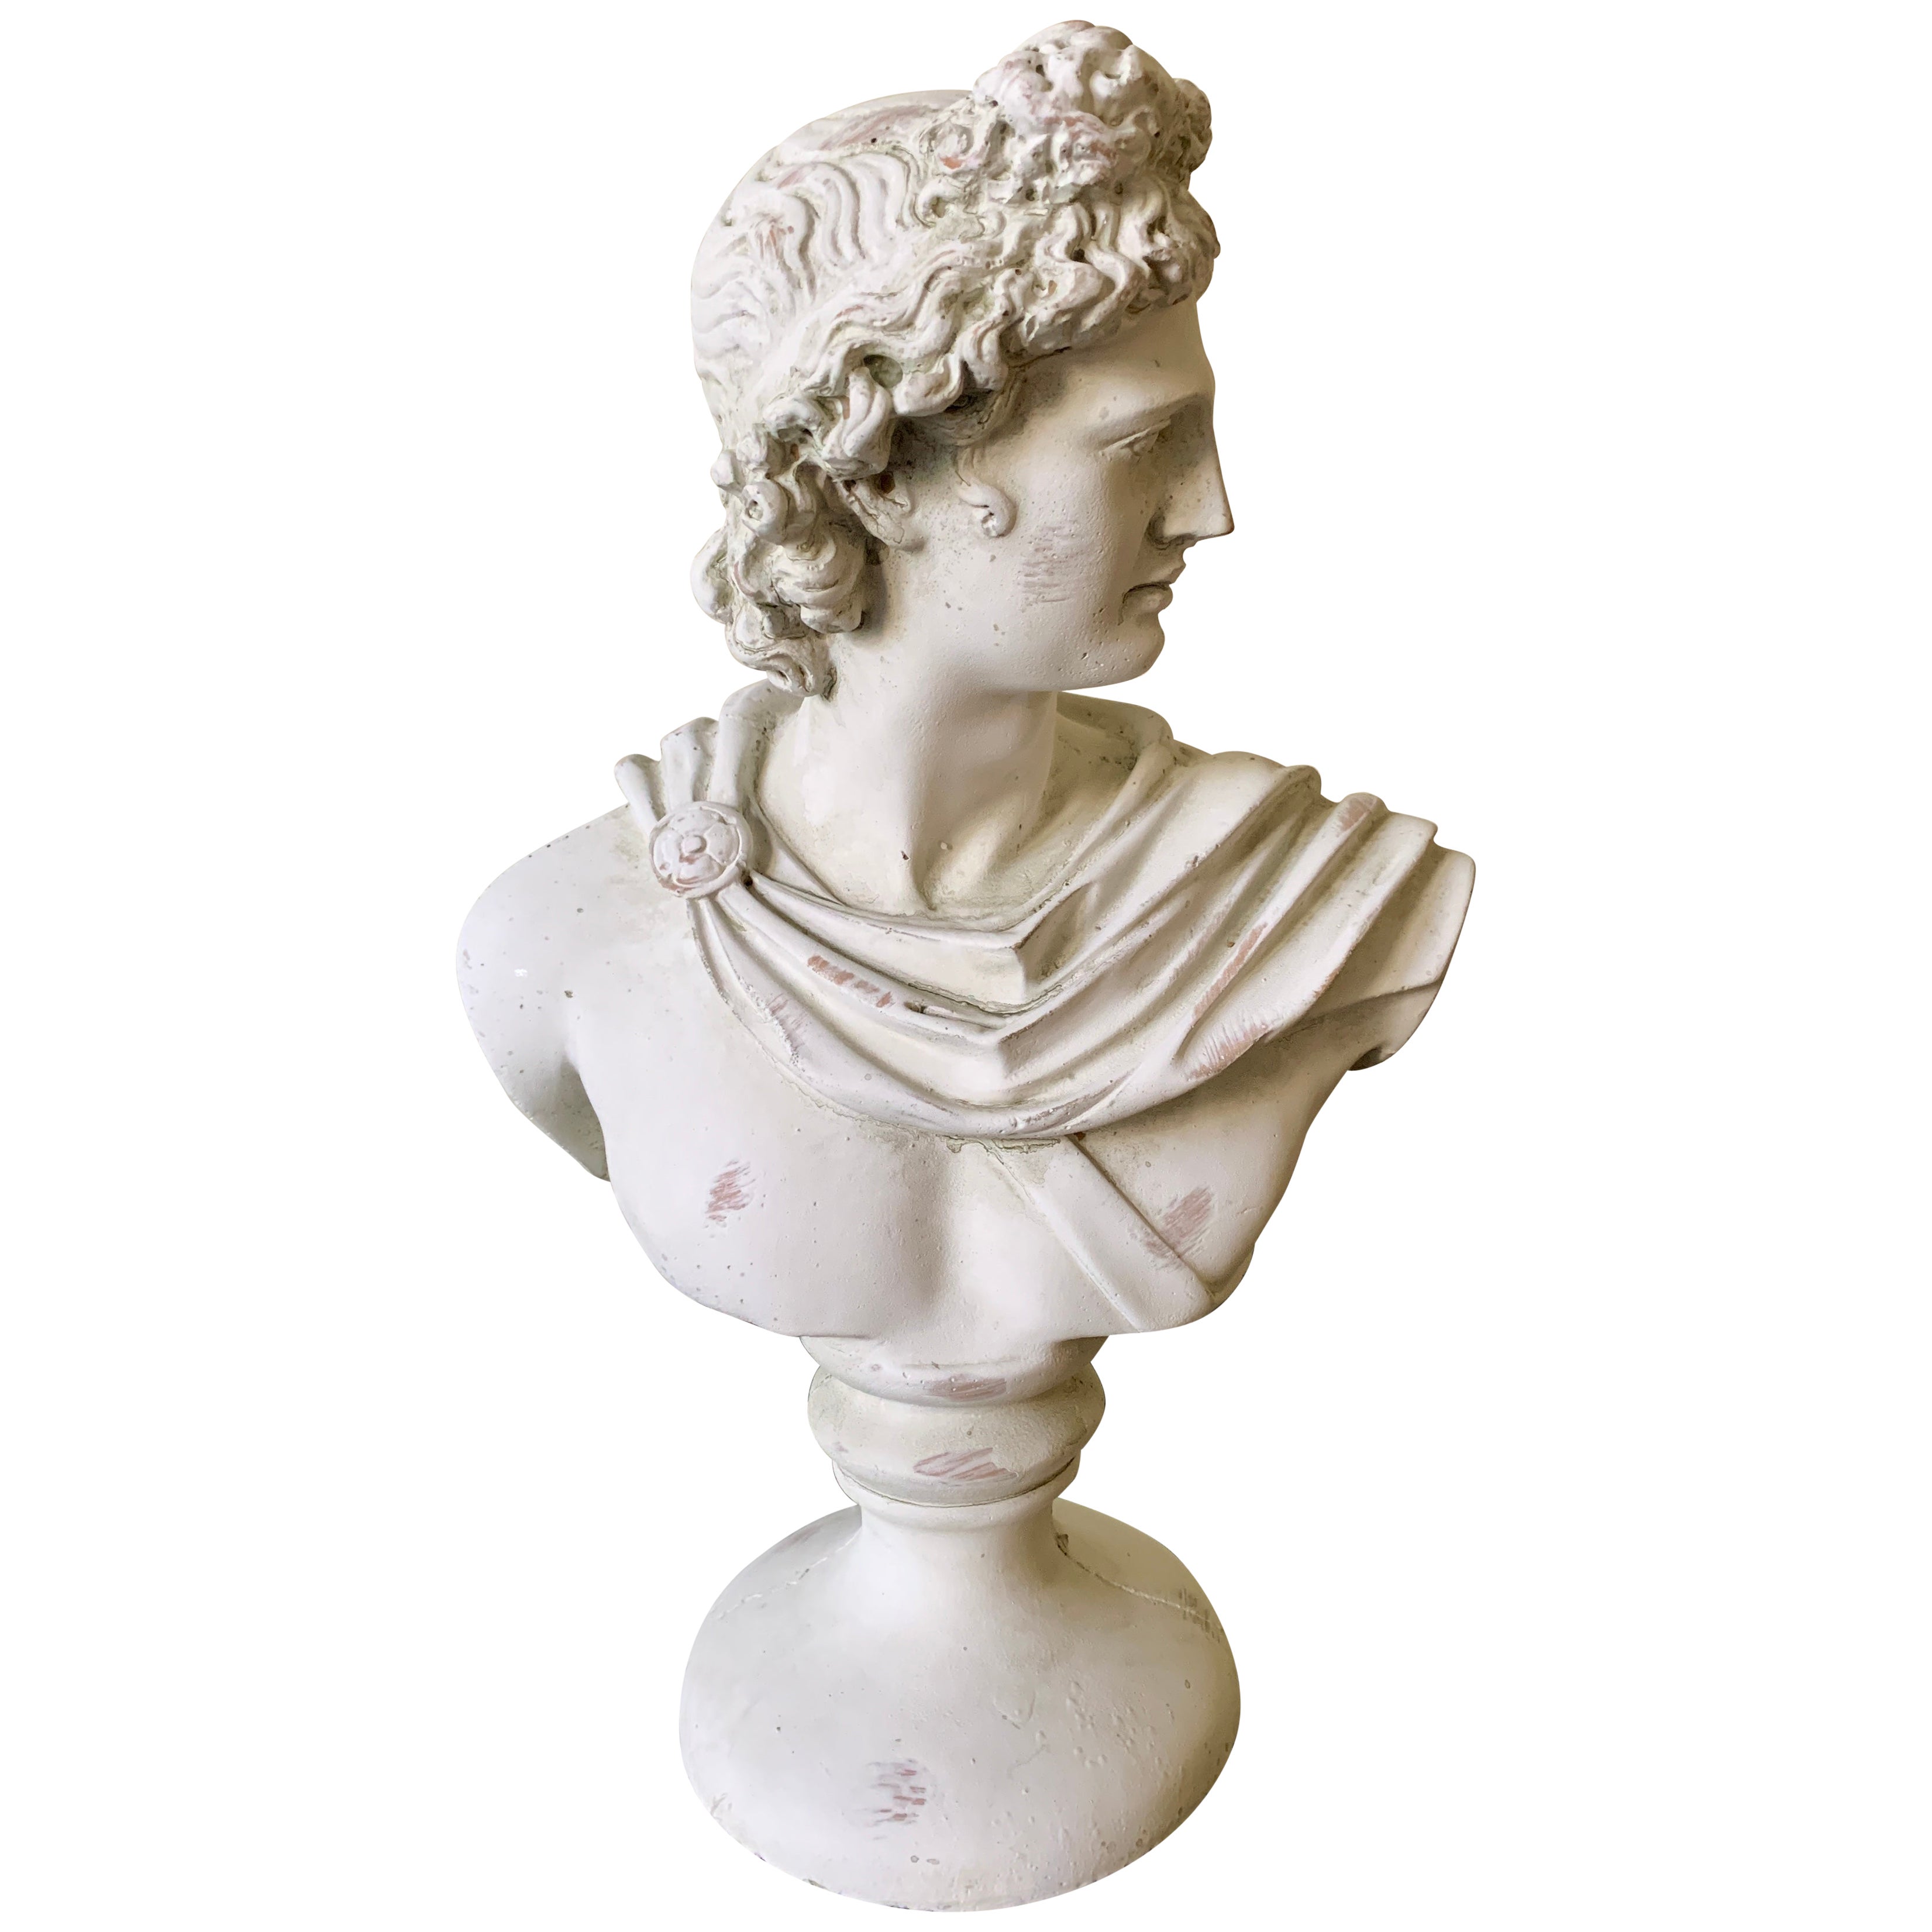 Classical Plaster Bust of Mythological Apollo Belvedere Sculpture